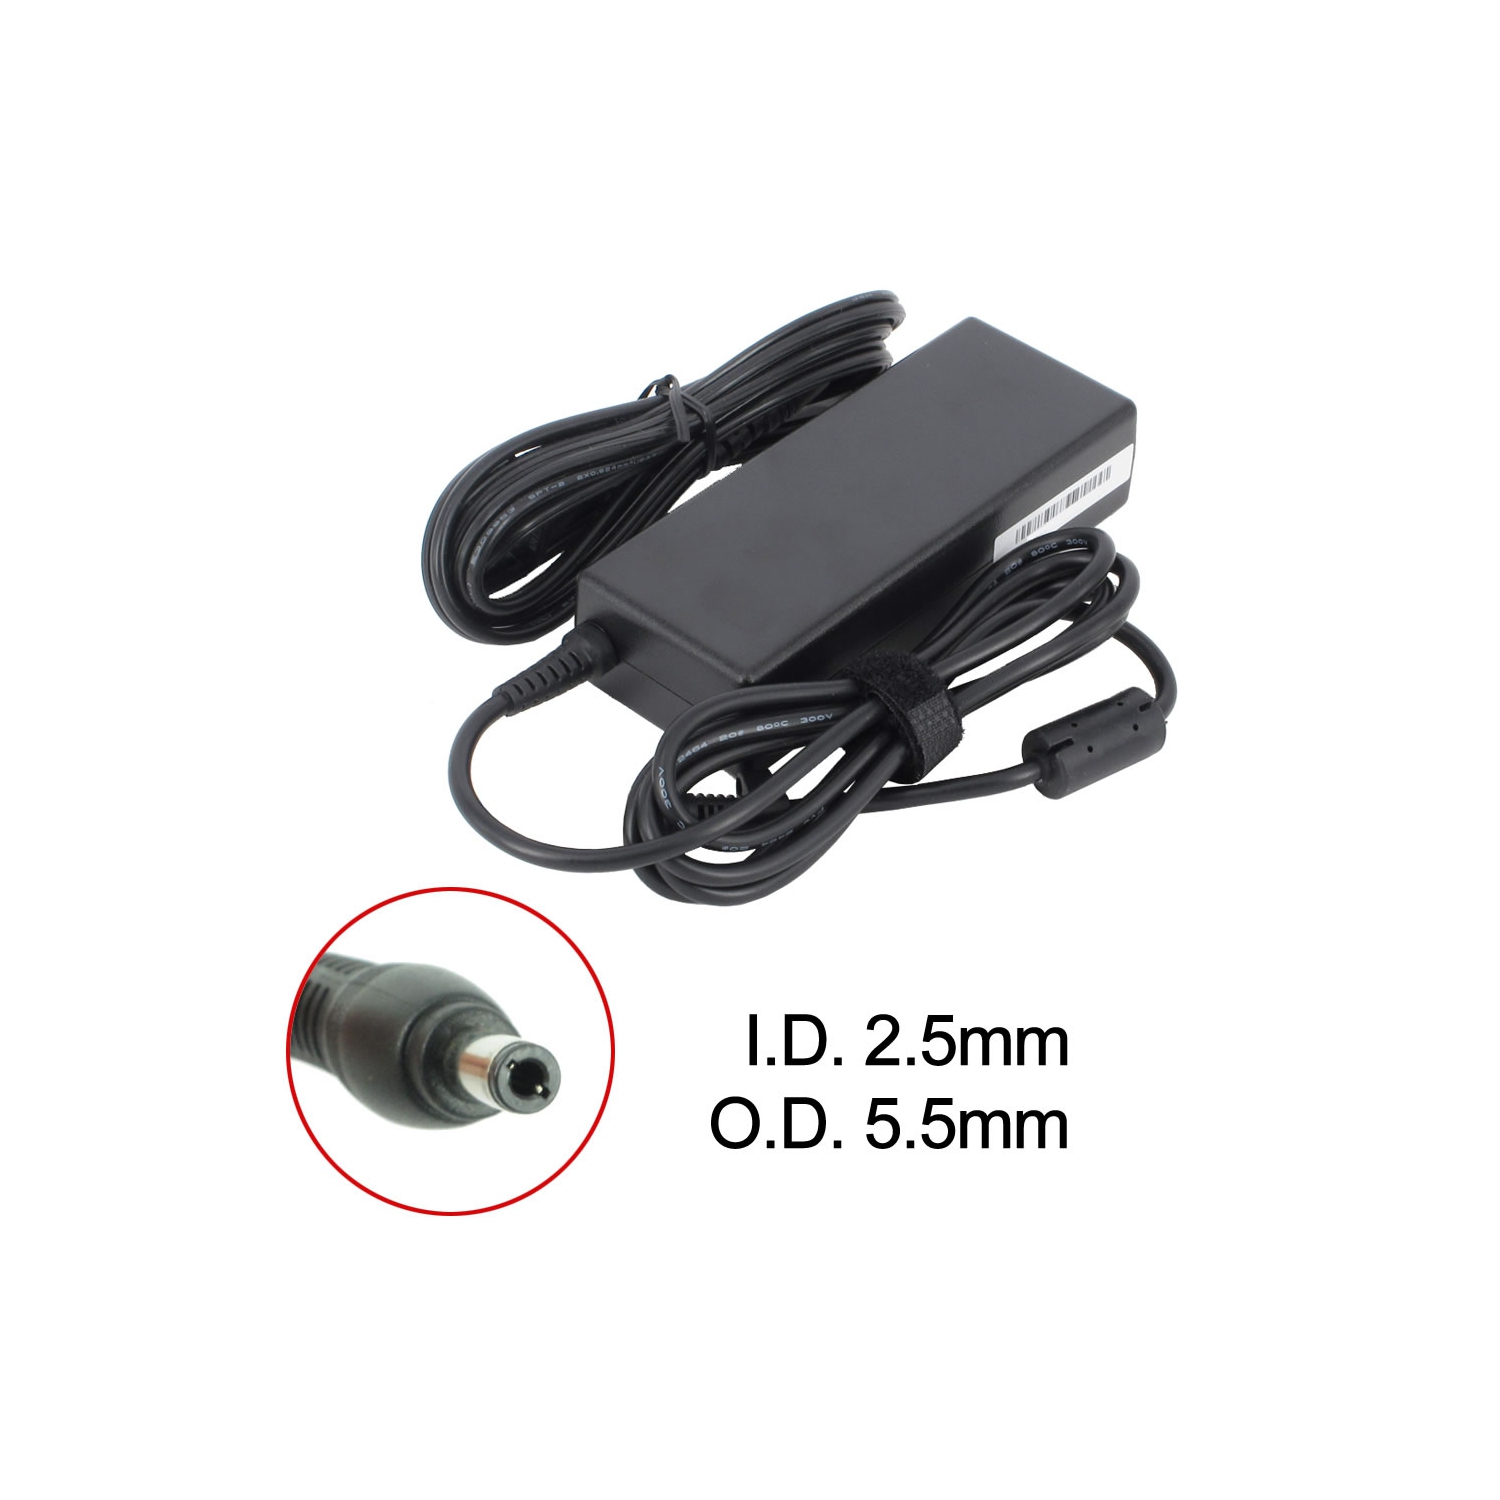 BATTDEPOT New Laptop AC Adapter for NEC LC950/4E 103942 808-875692-010A 9T458 ADP-65 HB BBEF PA-1900-36 SA80-3115